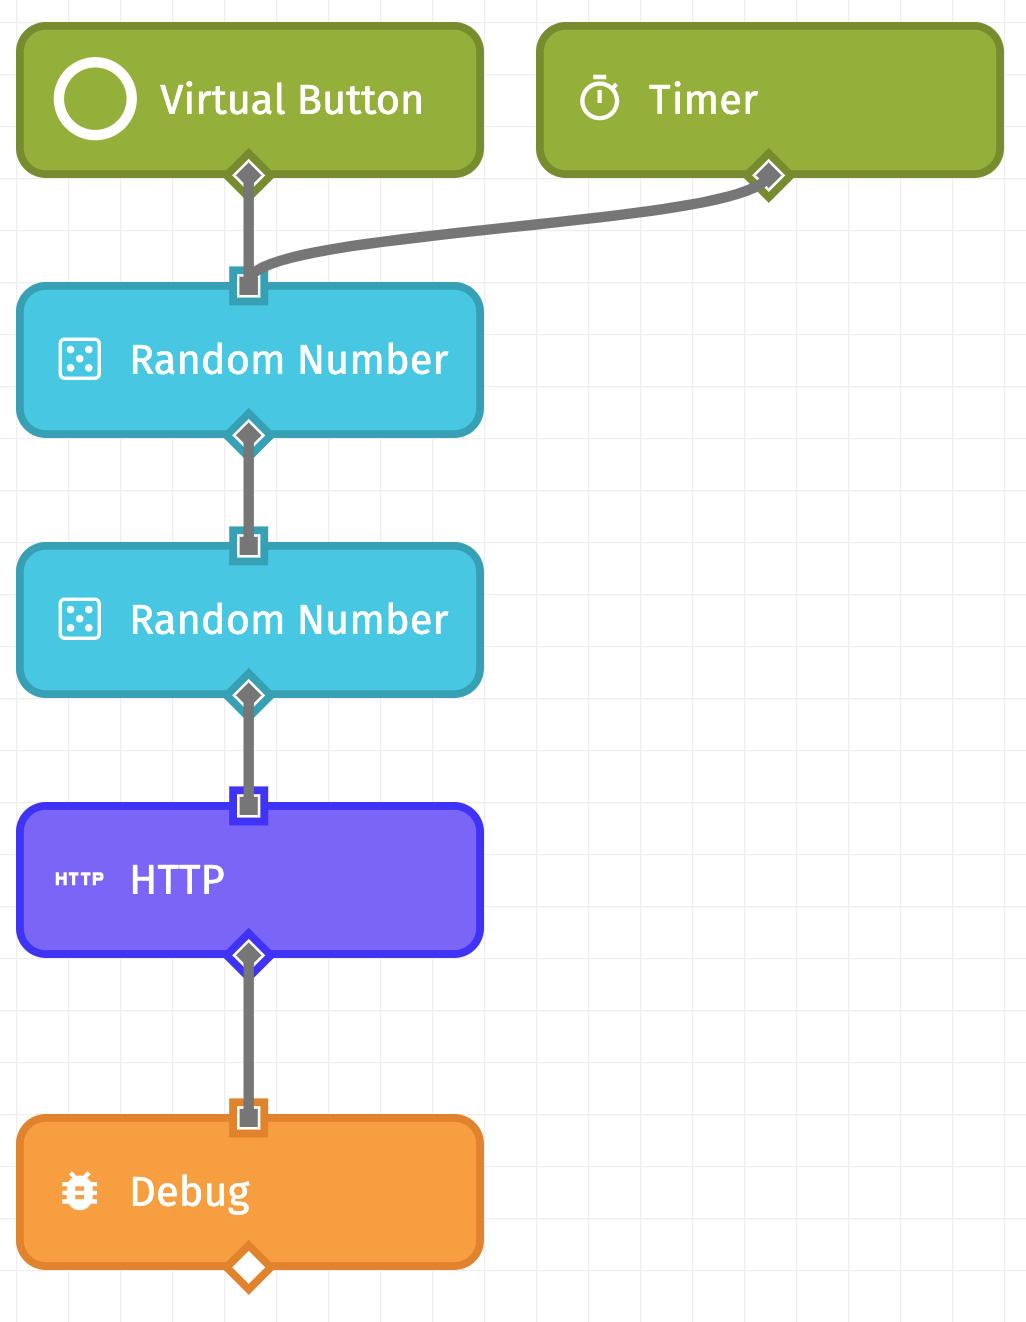 Losant Edge Workflow for sending data to InfluxDB